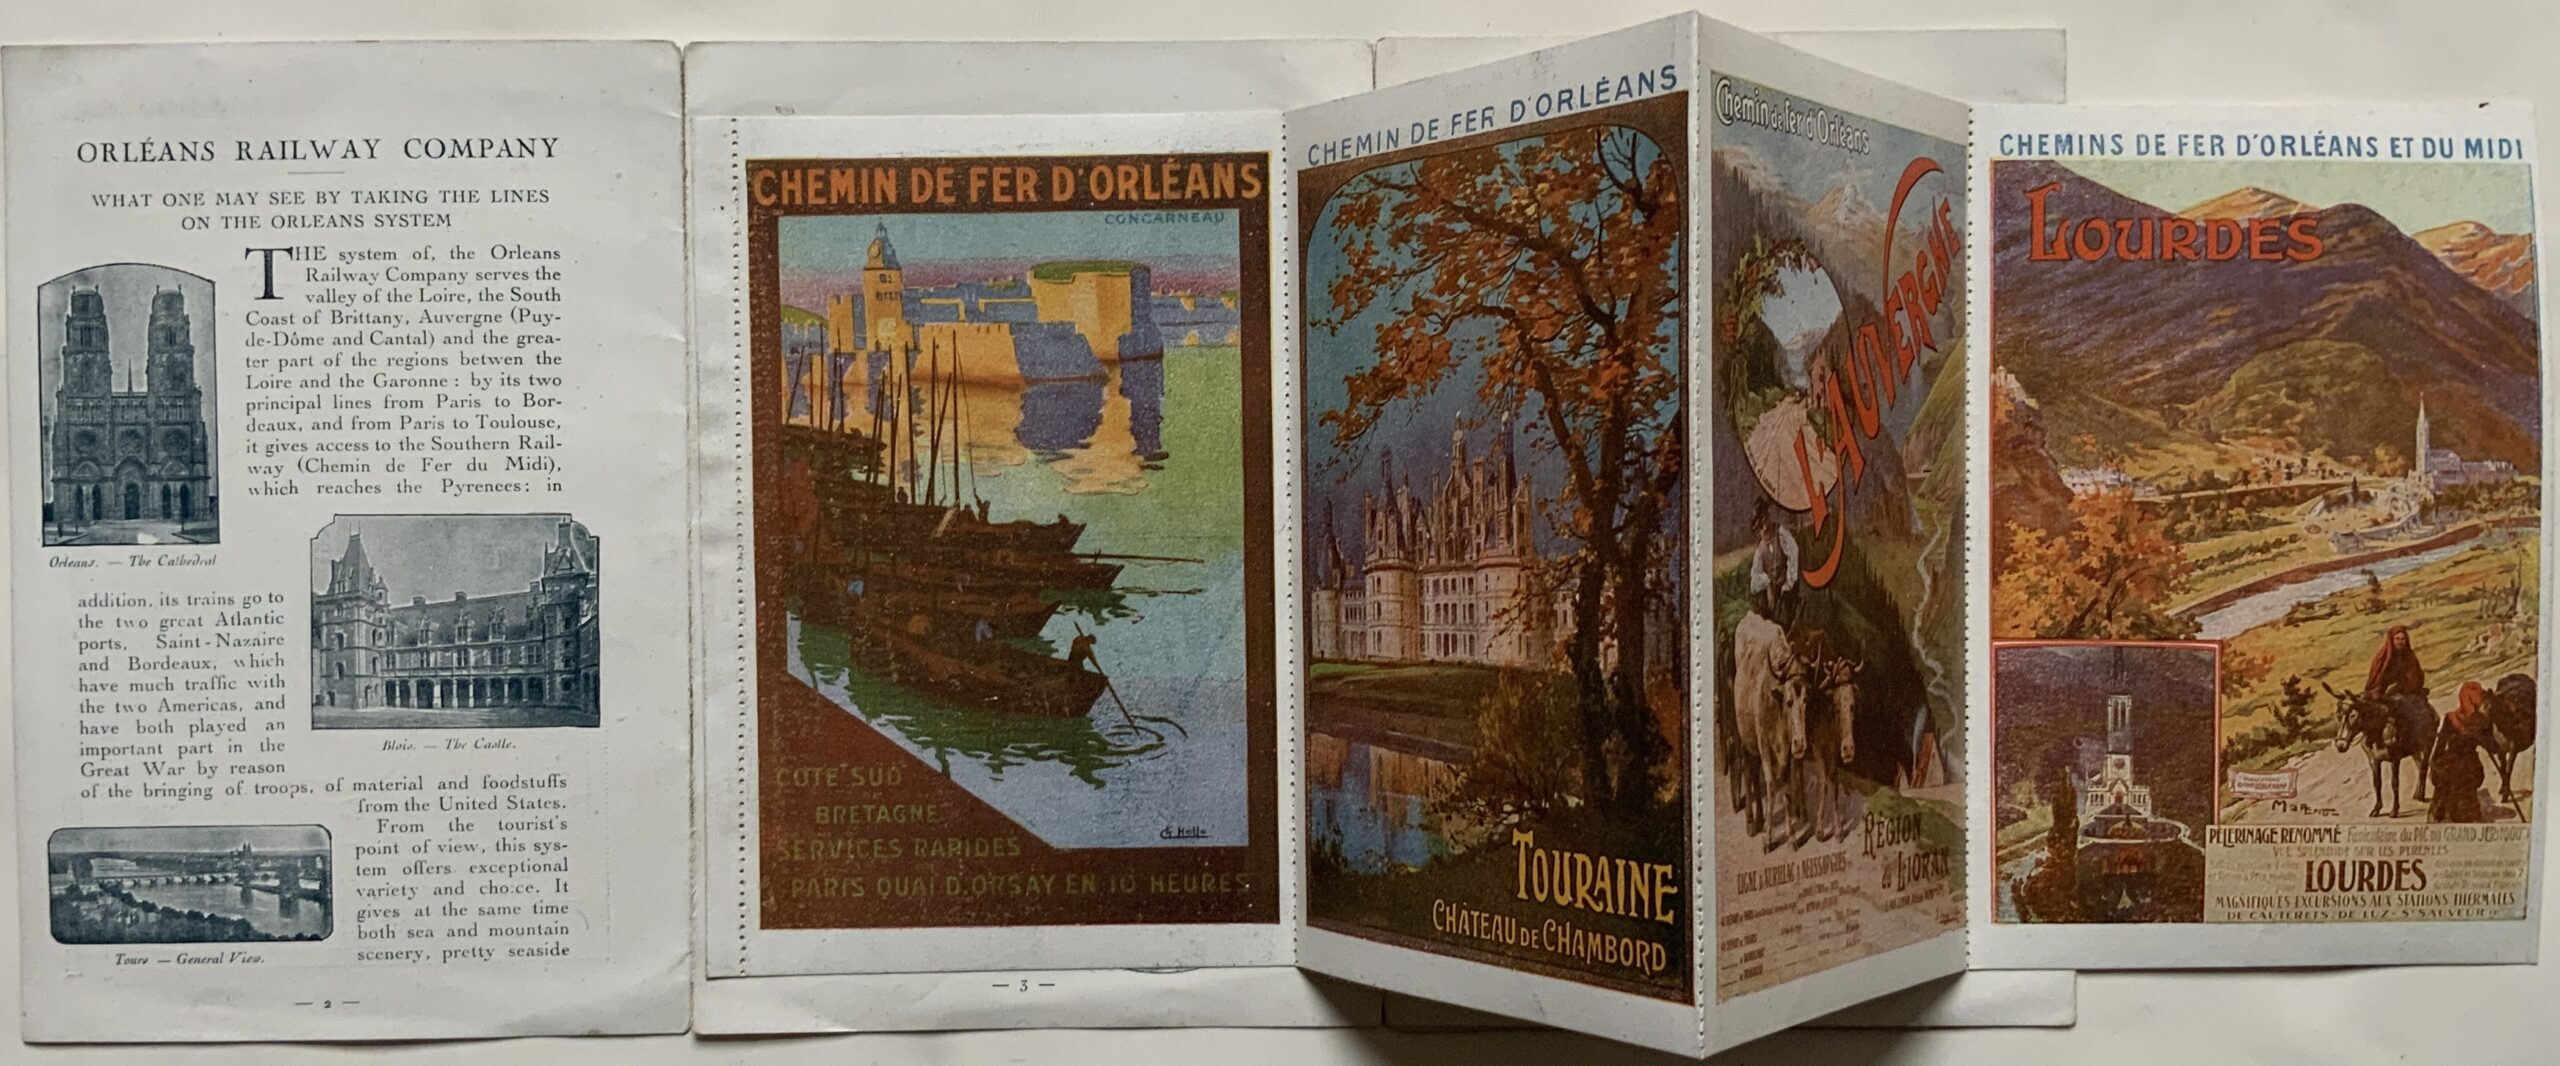 M266	FRENCH ORLEANS RAILWAY POSTER POSTCARD PROMOTIONAL BOOKLET CA. 1920